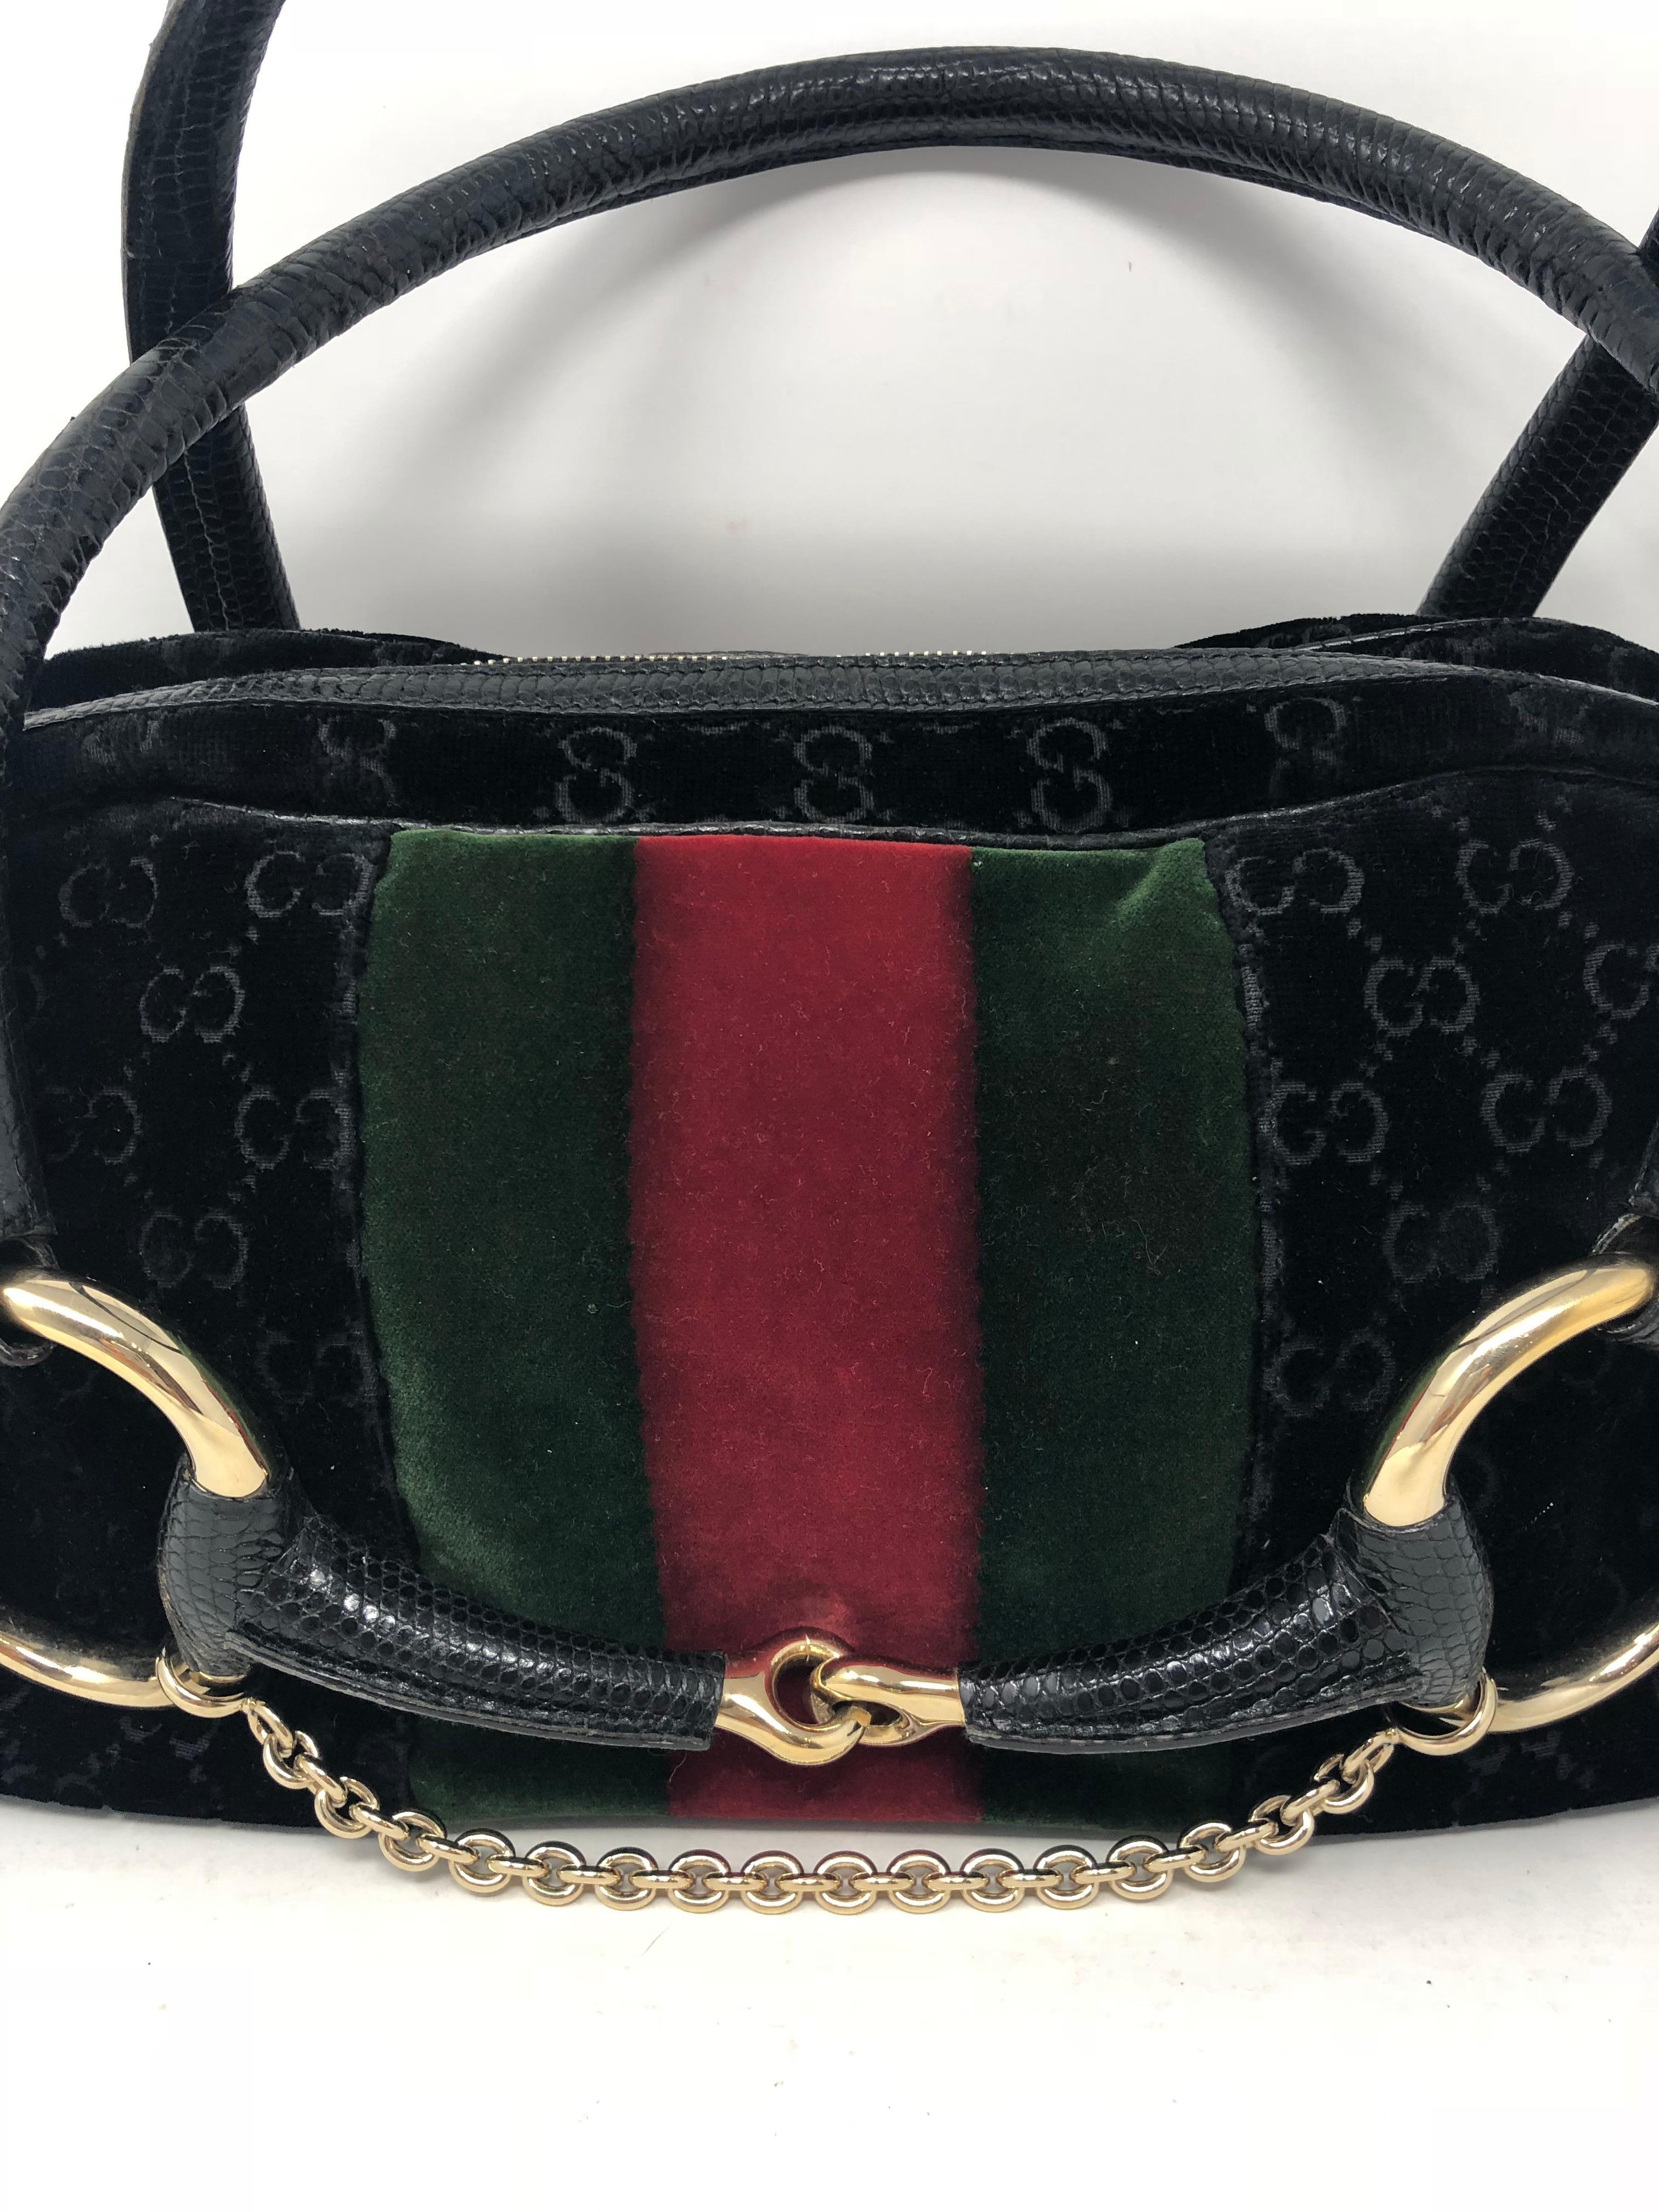 Gucci Limited Edition Black with red and green stripe. Gold horsebit and chain detail. Unique Gucci bag. Celebrity owned. Good condition. Guaranteed authentic. 